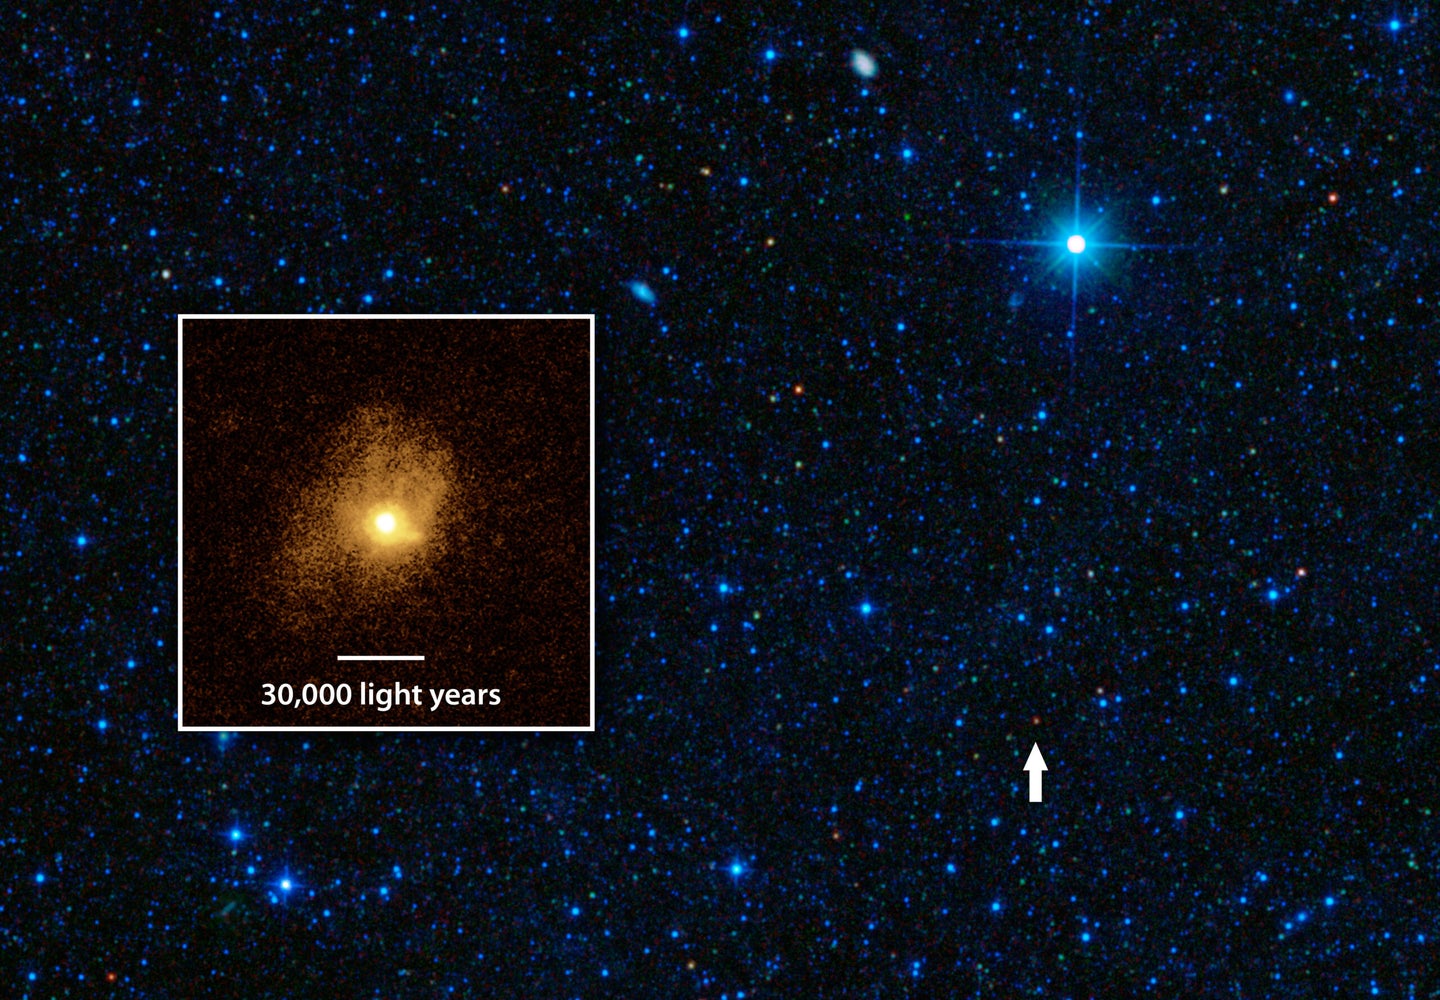 Conscientious Galaxy Uses All Its Fuel To Make New Stars, Leaving No Waste Behind